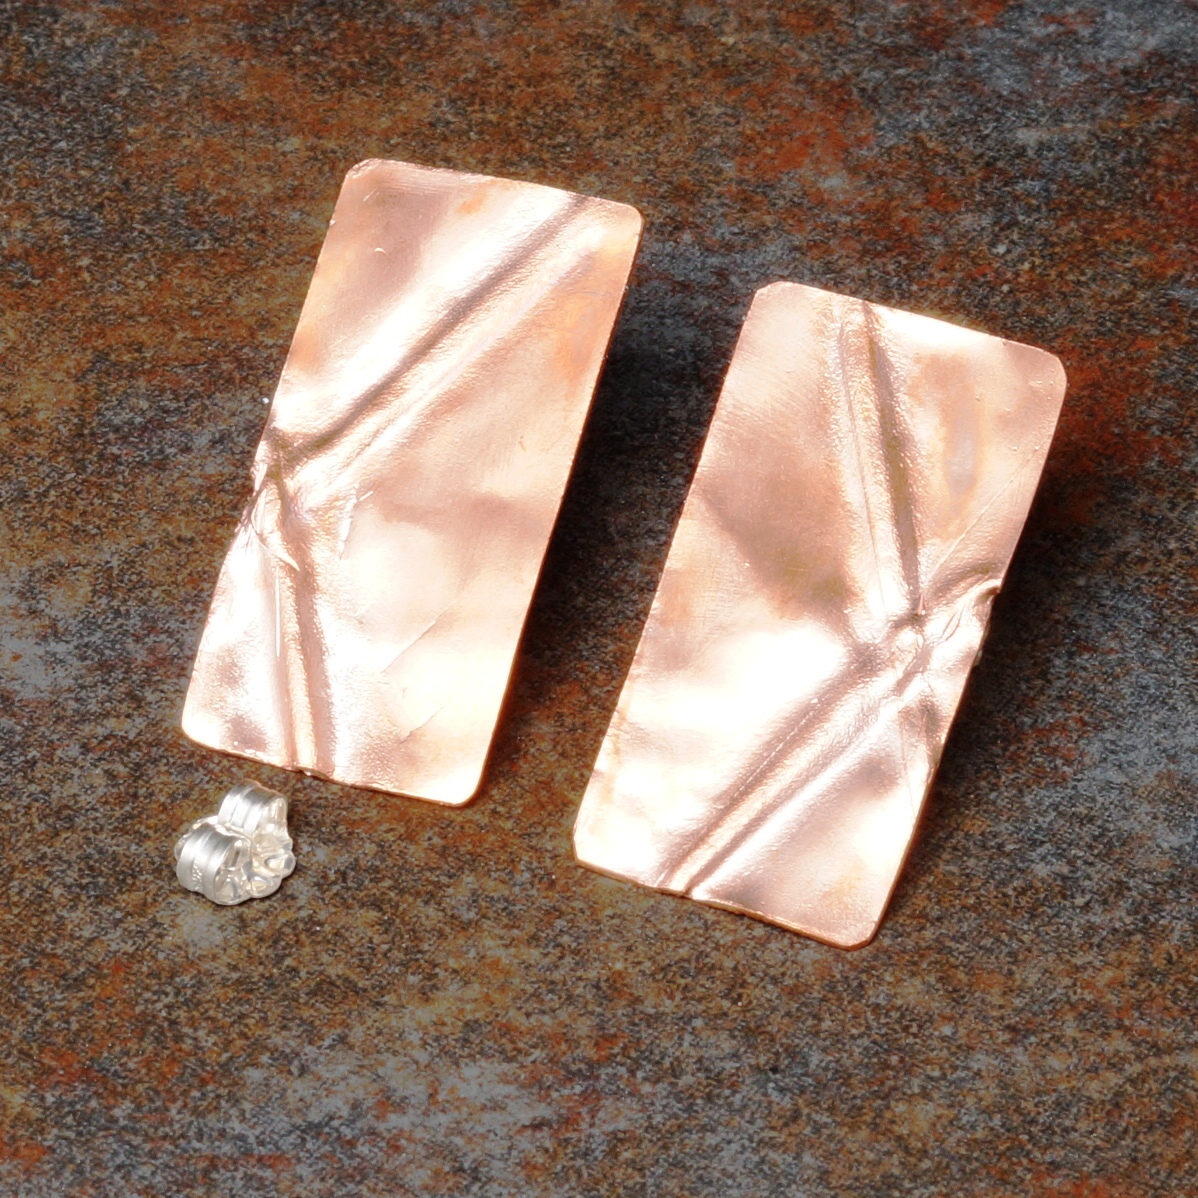 Handmade Rectangular Copper fold formed studs with sterling silver posts